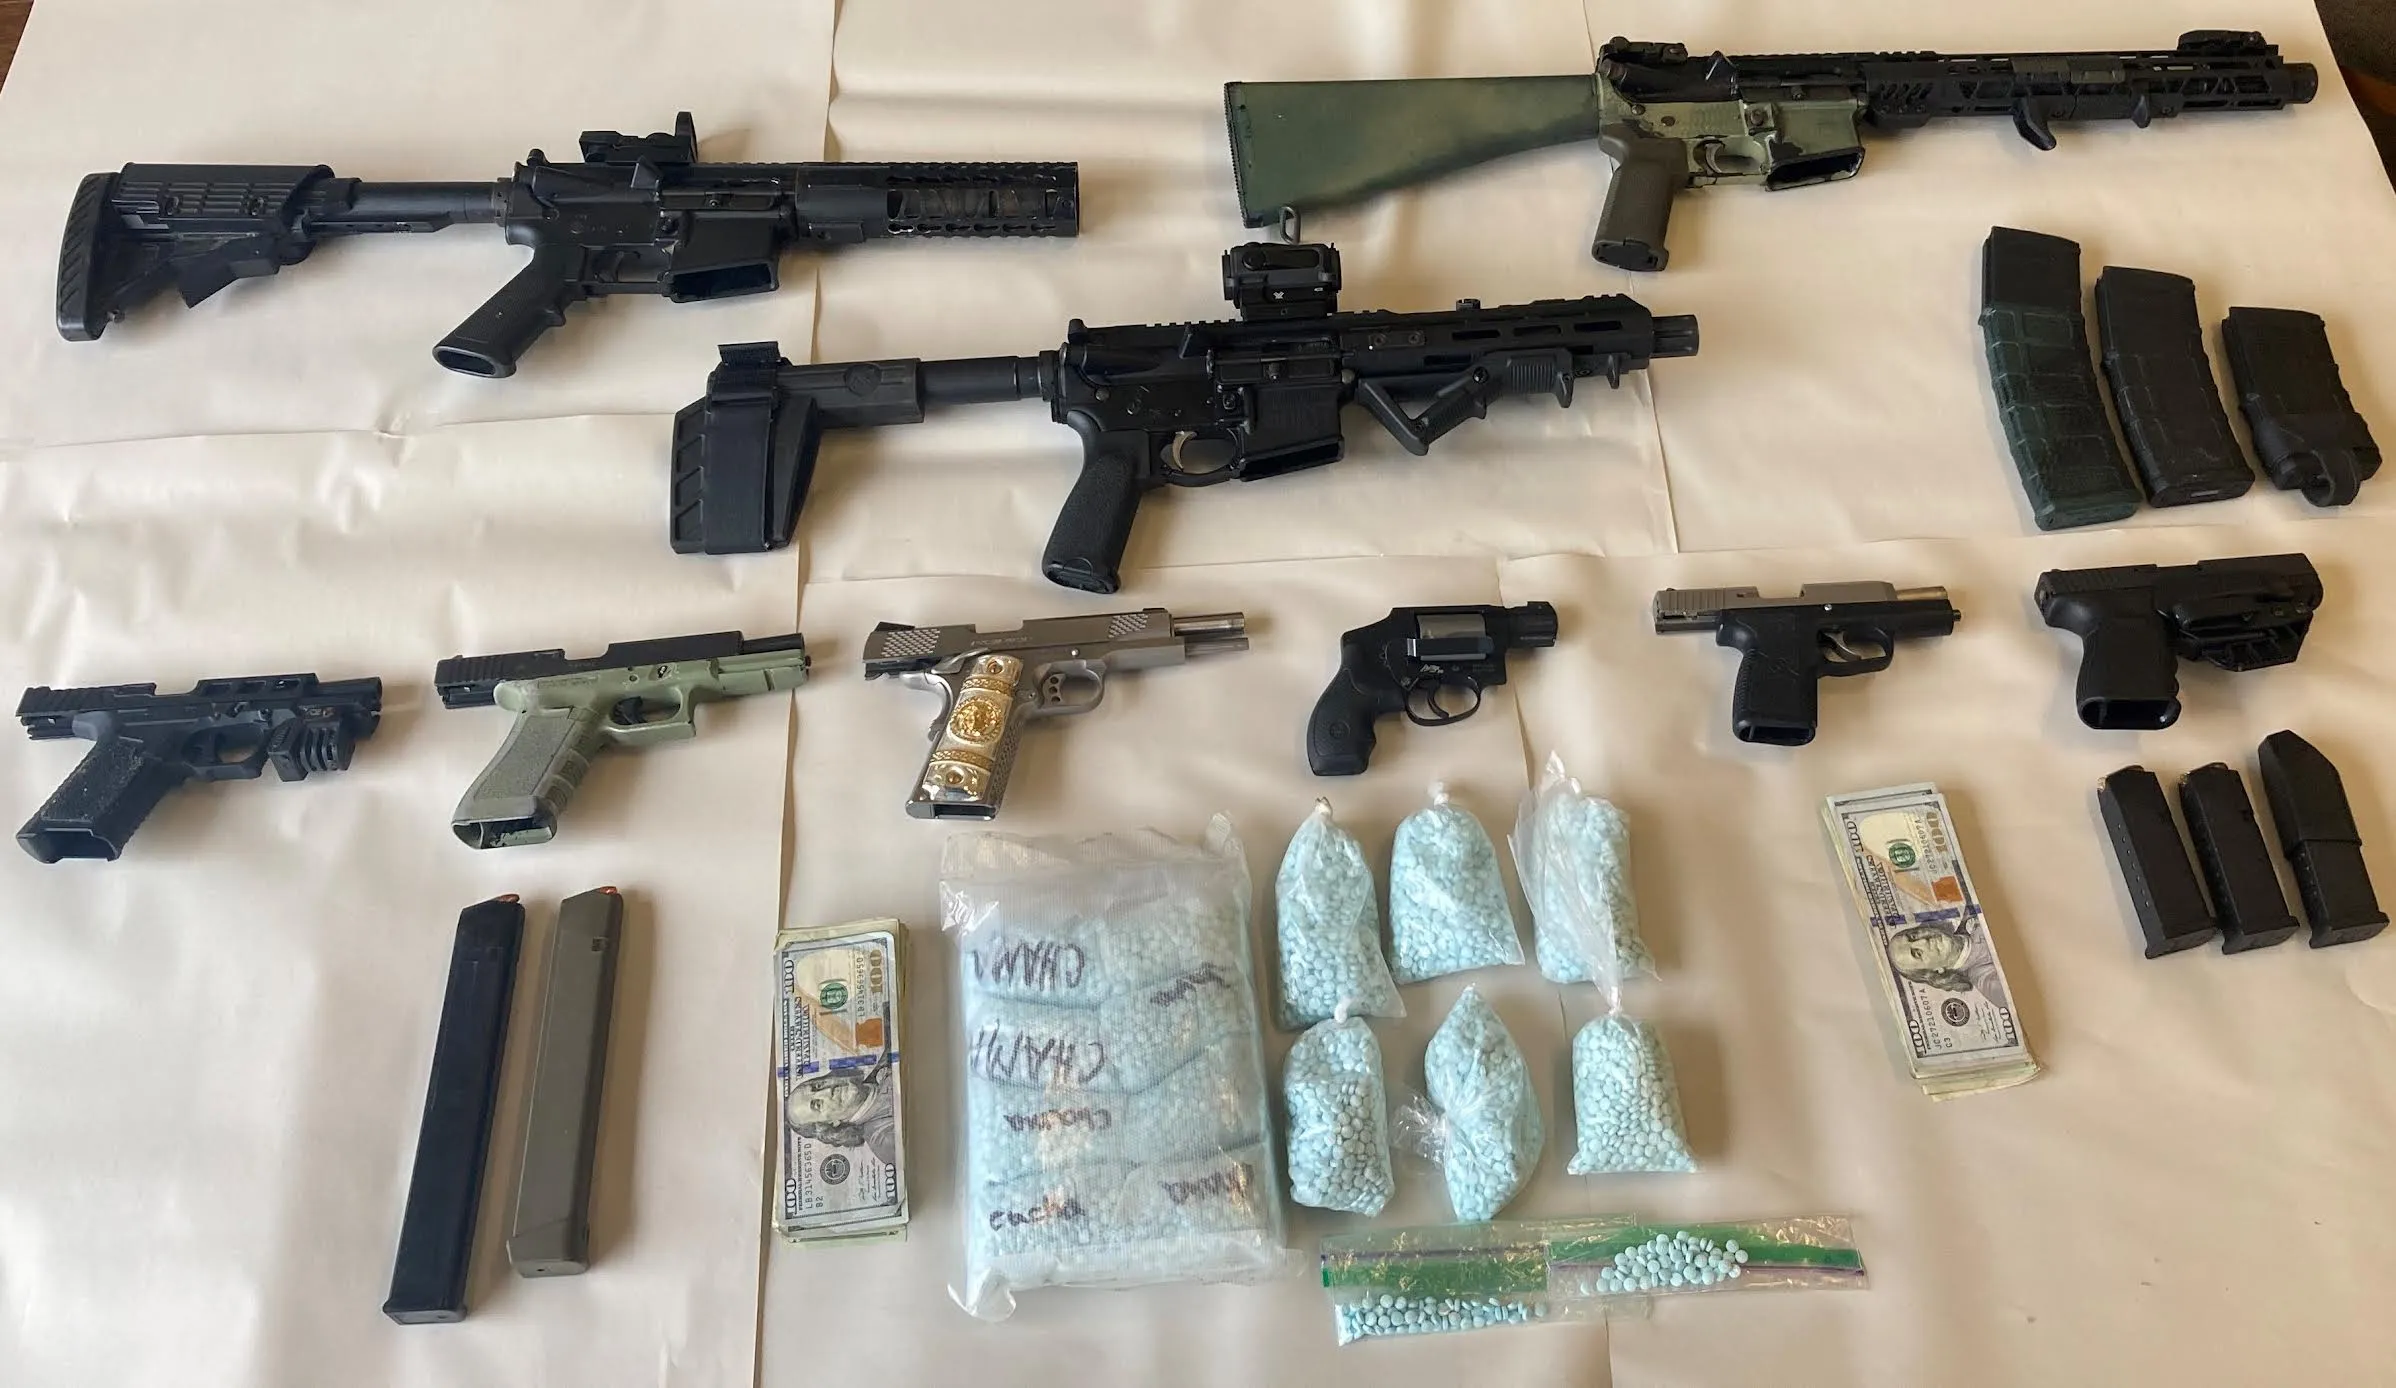 drug seizure imae with firearms and blue pills